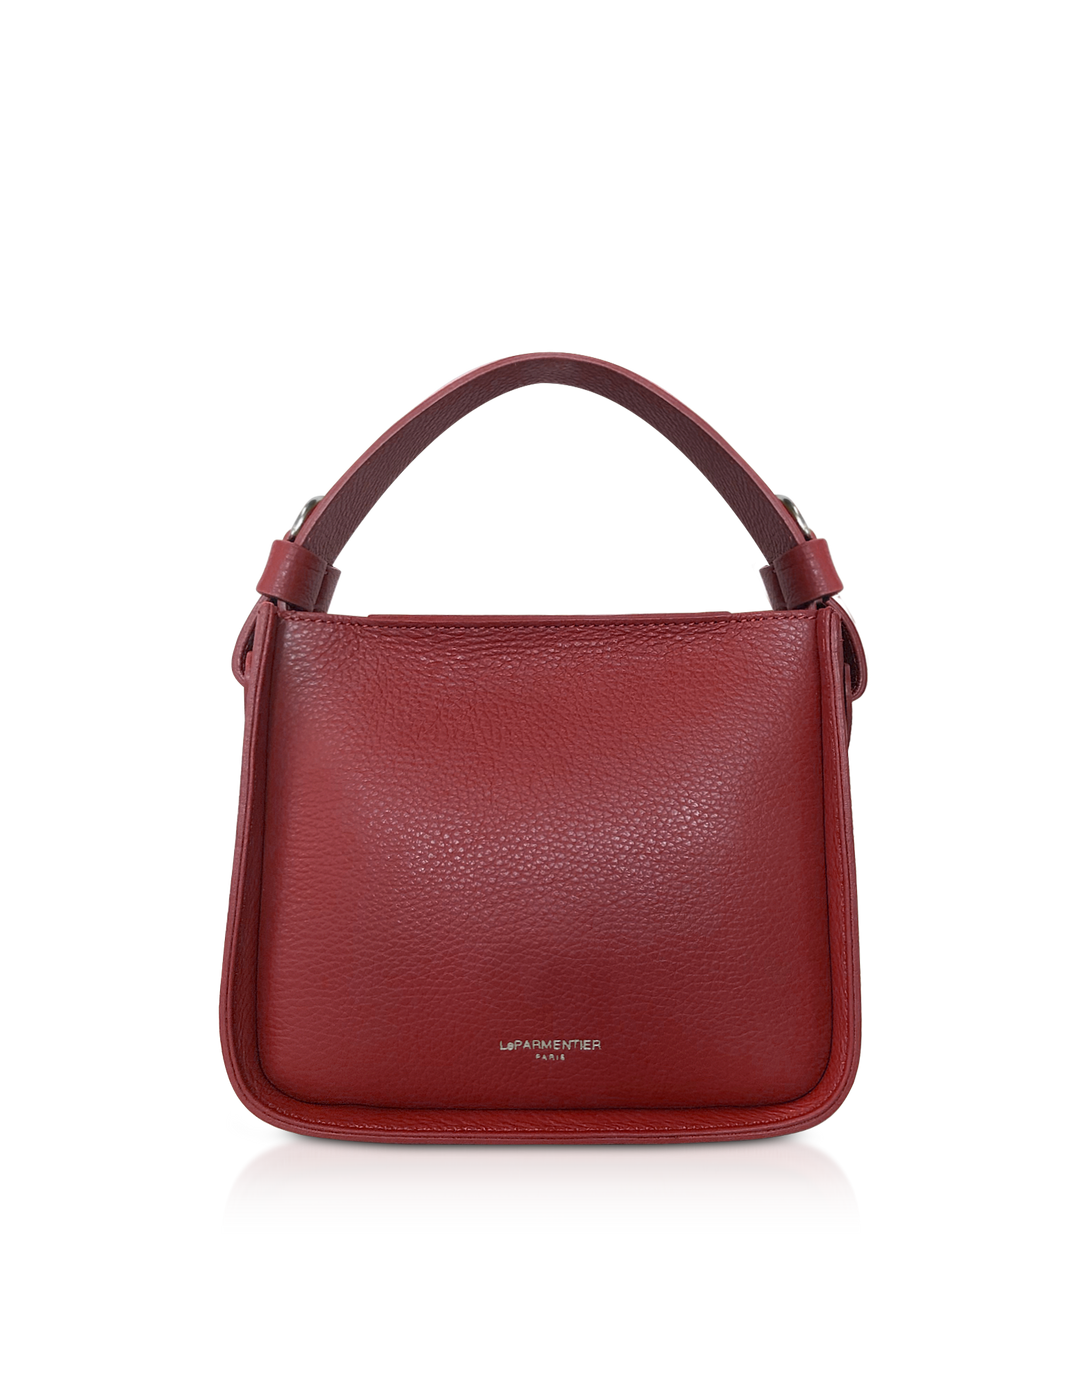 Red leather handbag with top handle